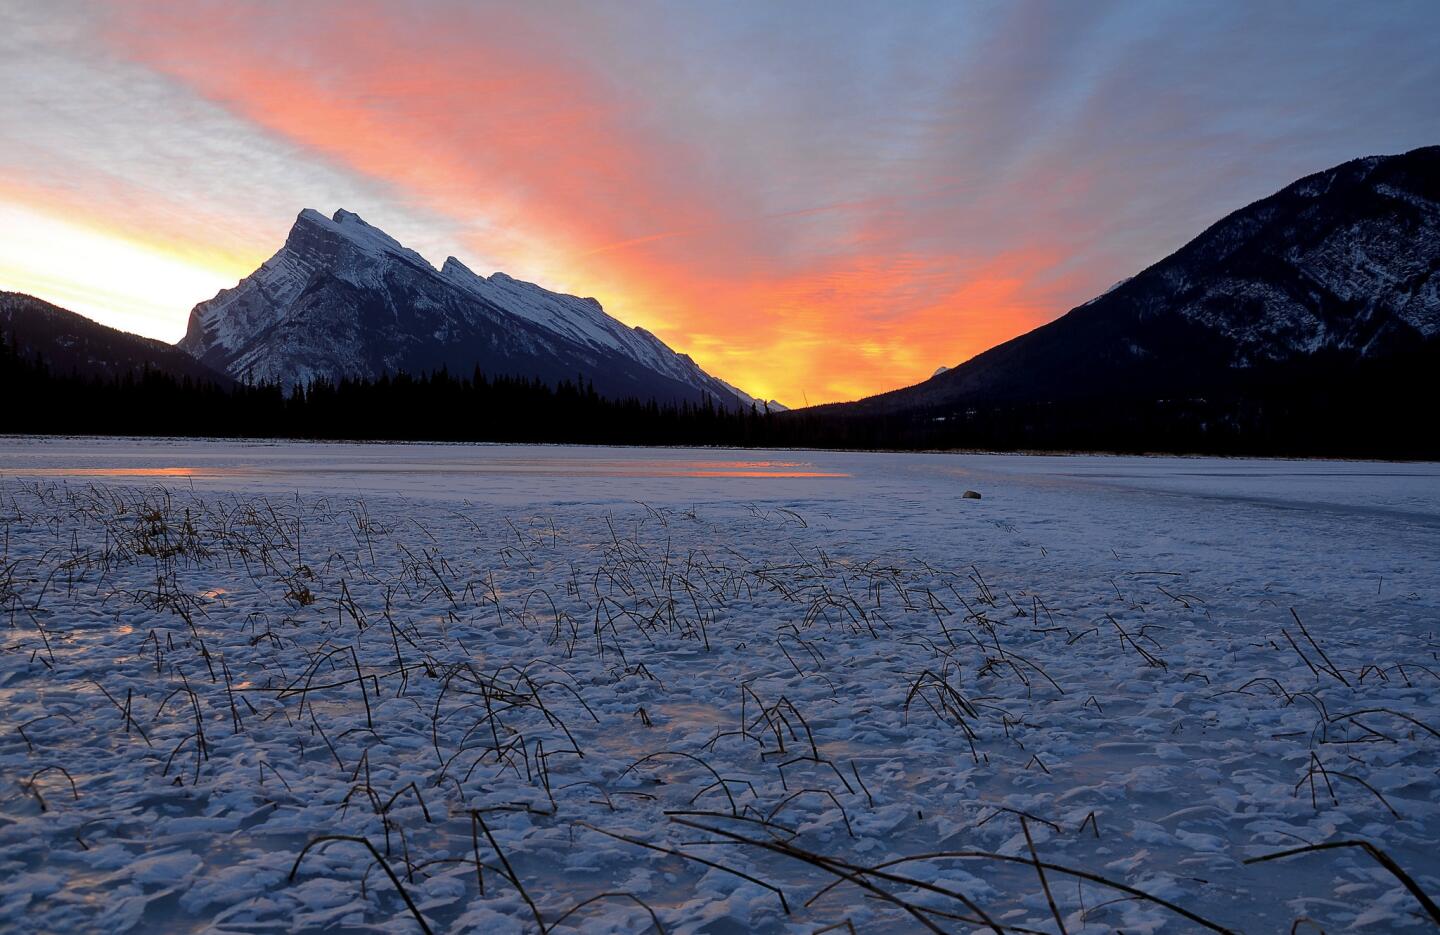 Mt. Rundle from Vermilion Lakes, Banff National Park